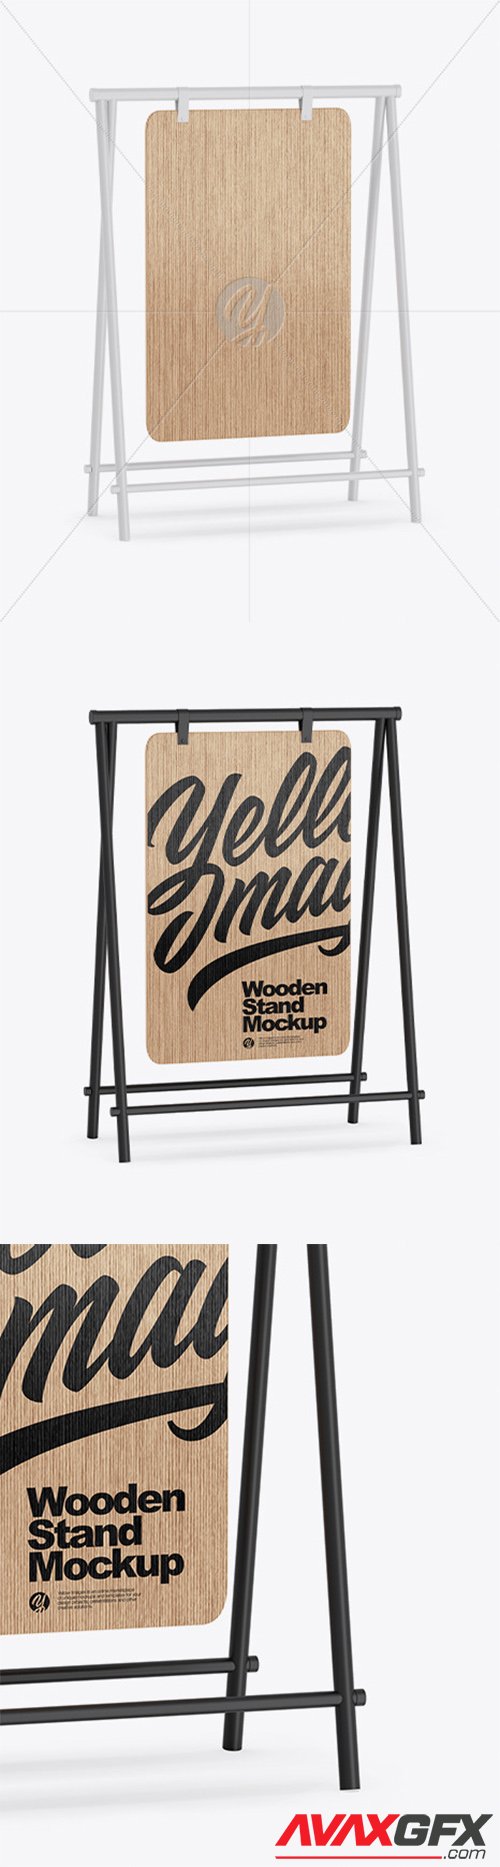 Wooden Stand Mockup 64332